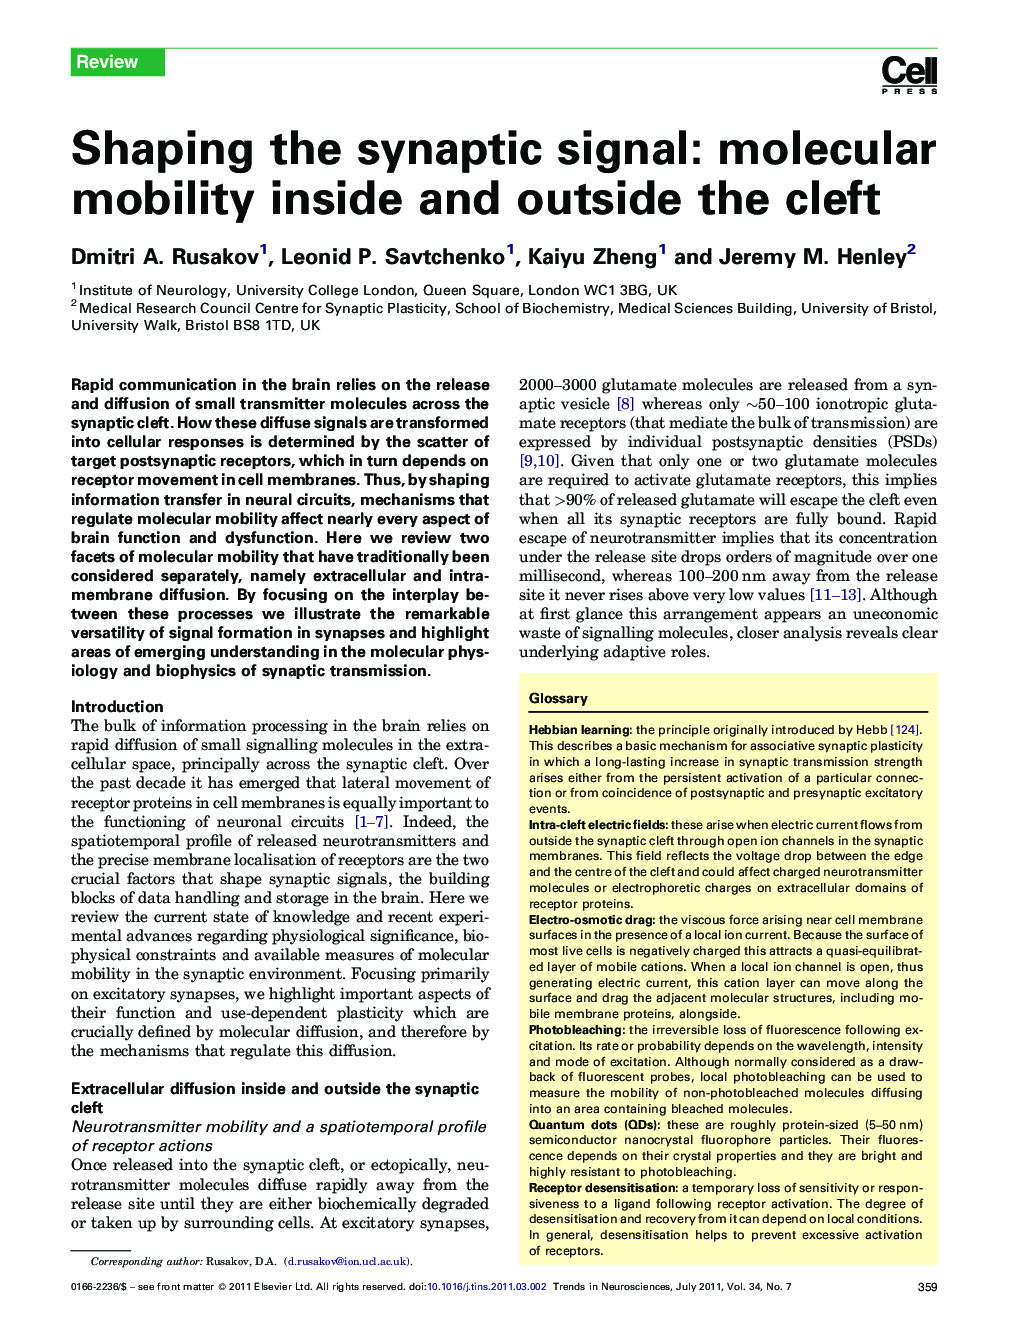 Shaping the synaptic signal: molecular mobility inside and outside the cleft